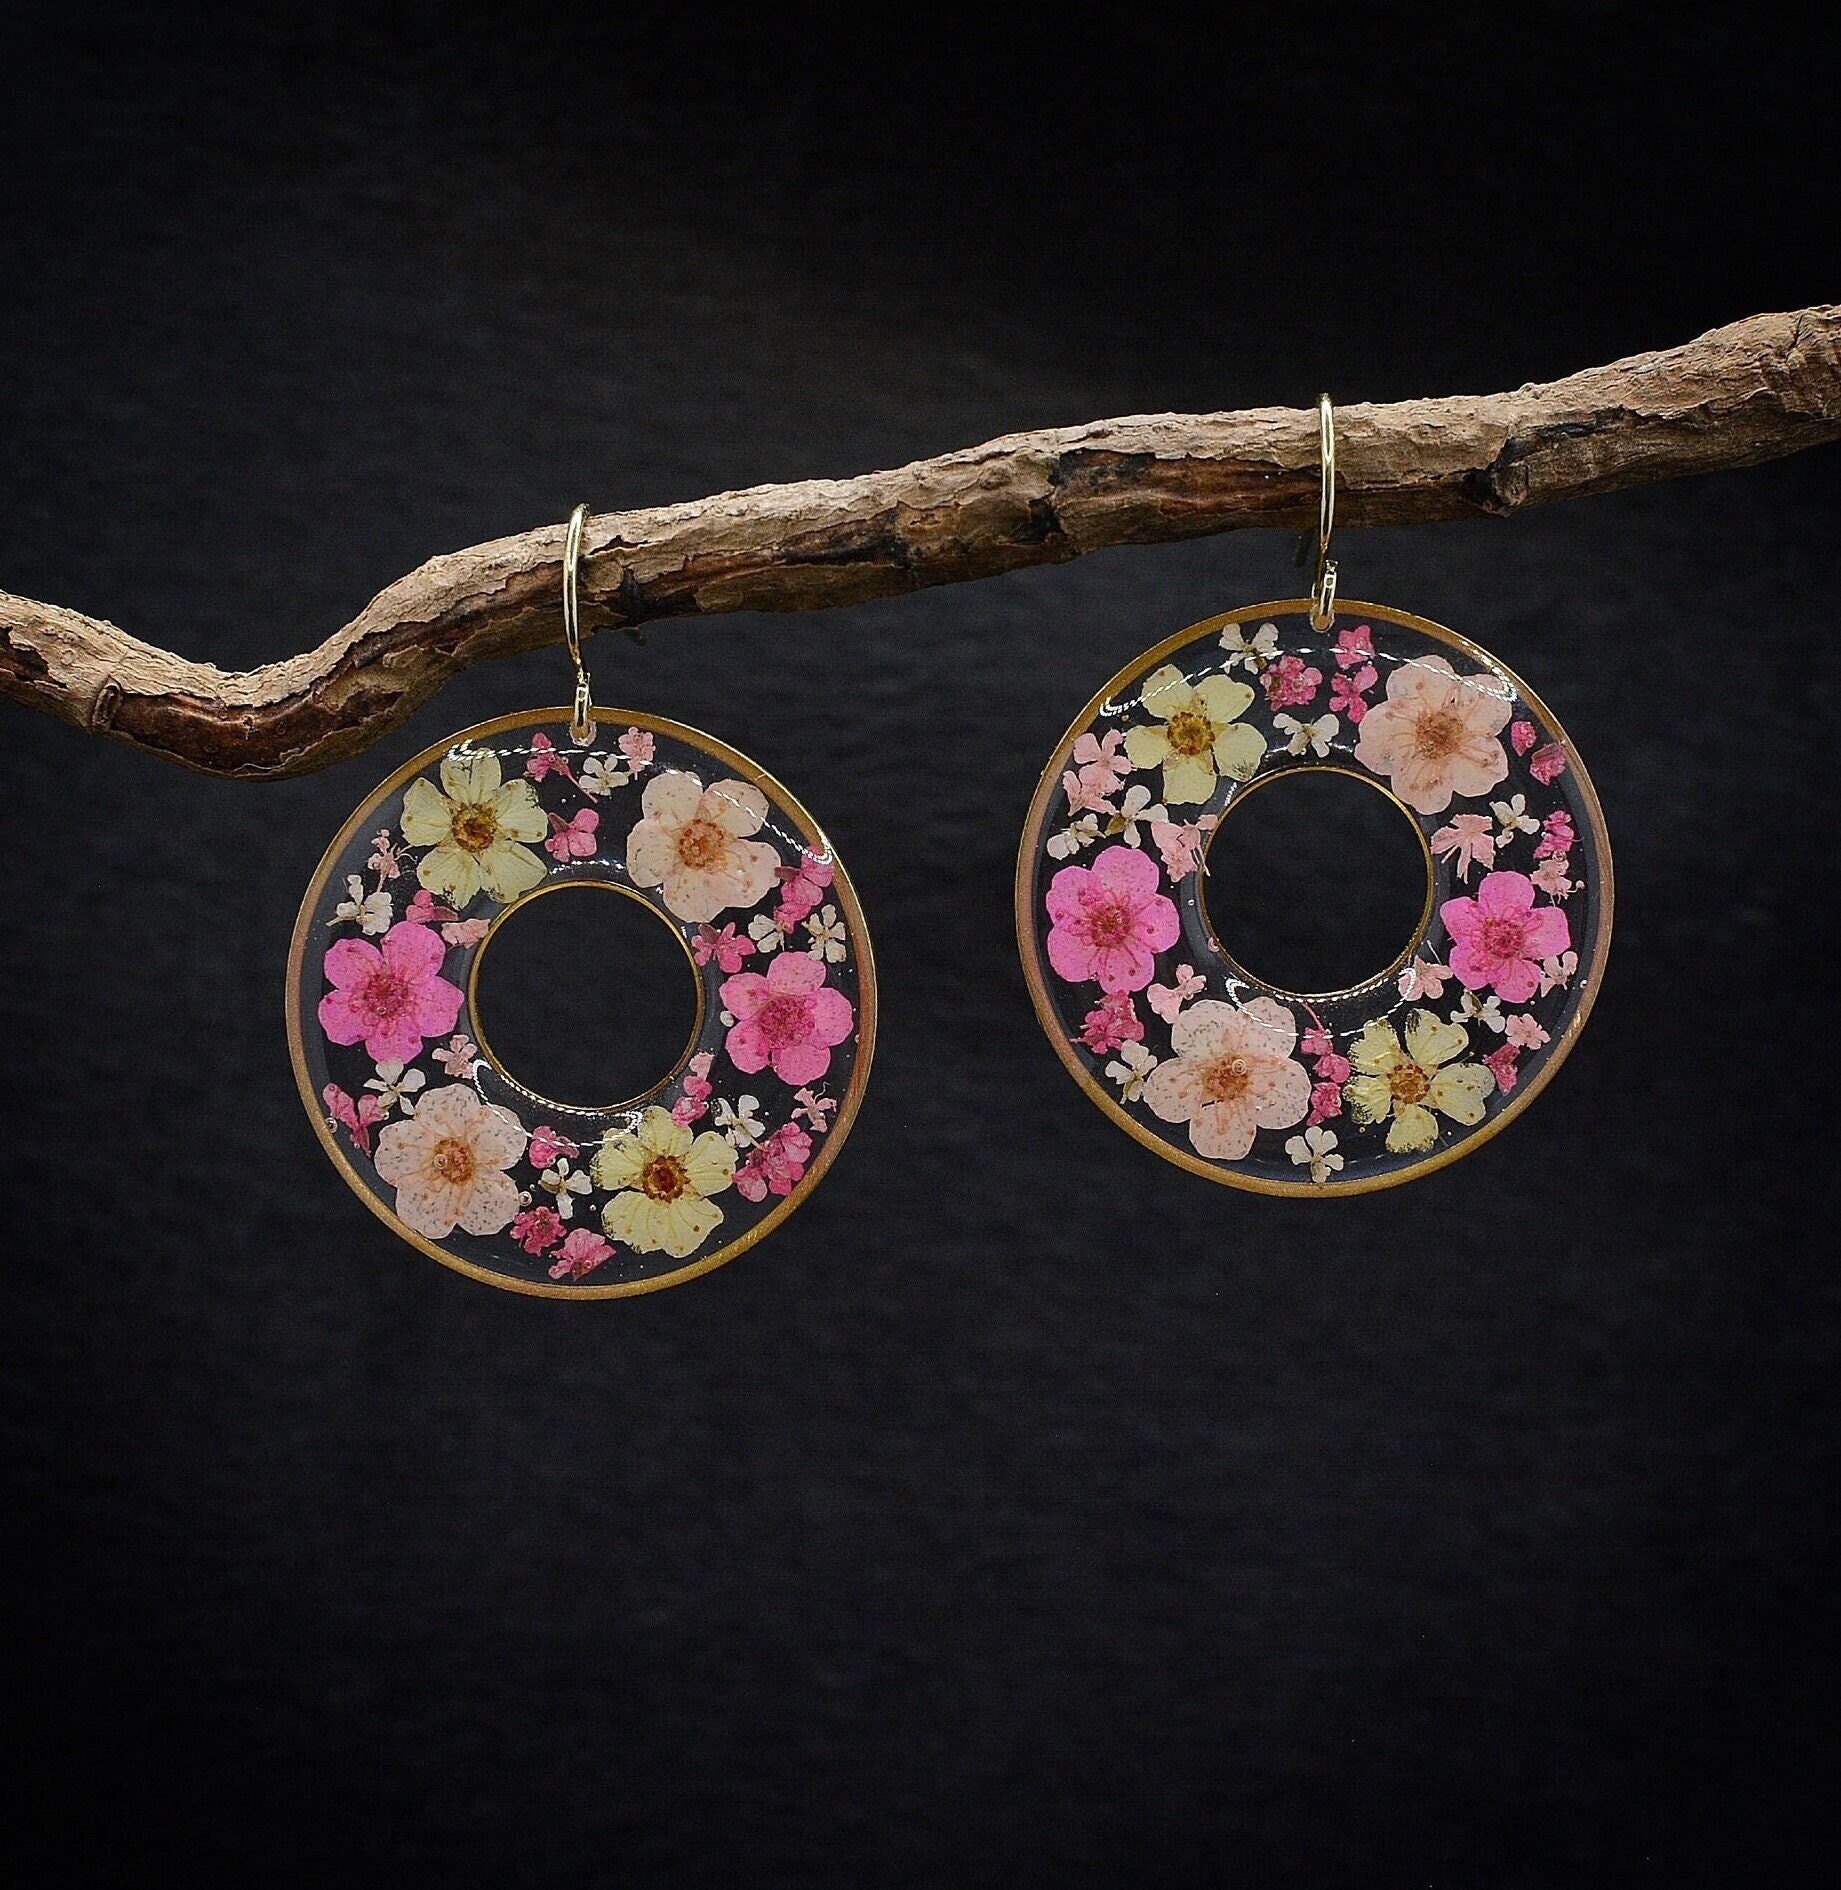 Real Flower Earrings. Botanical Jewelry, Pressed Earrings, Pink Nature Jewelry